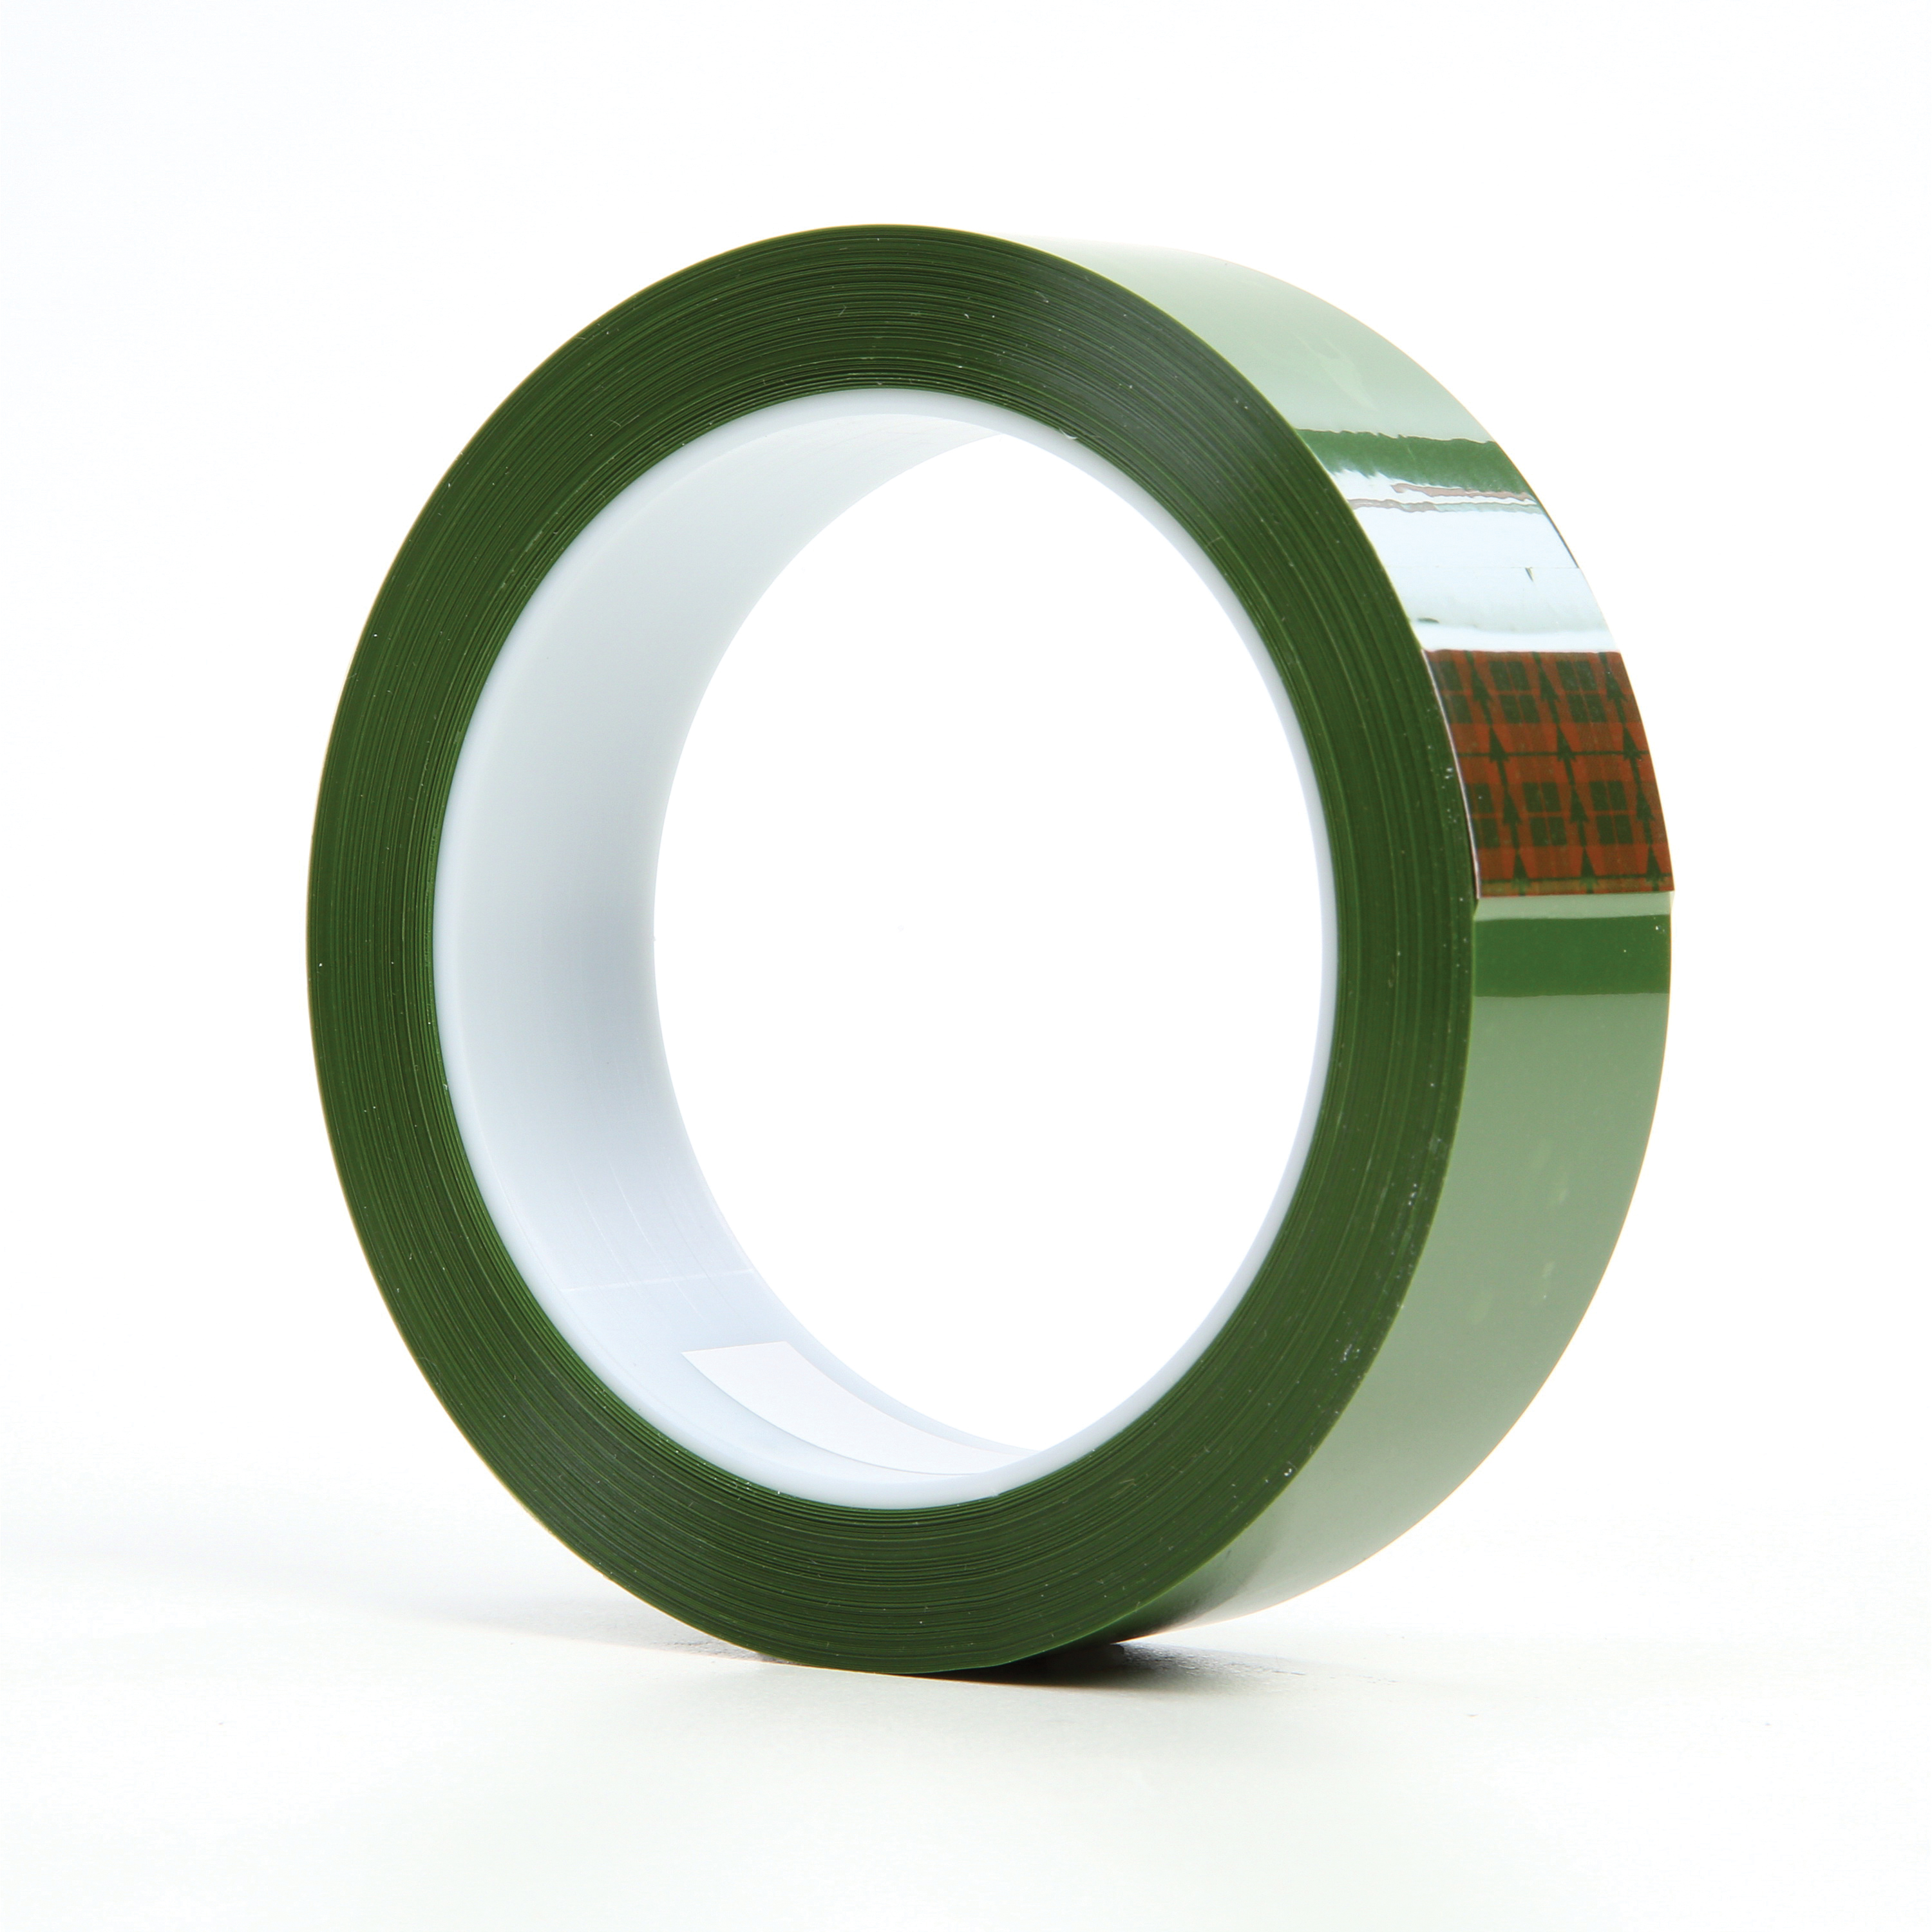 3M™ 021200-05687 Masking Tape, 72 yd L x 1 in W, 1.9 mil THK, Silicon Adhesive, Polyester Backing